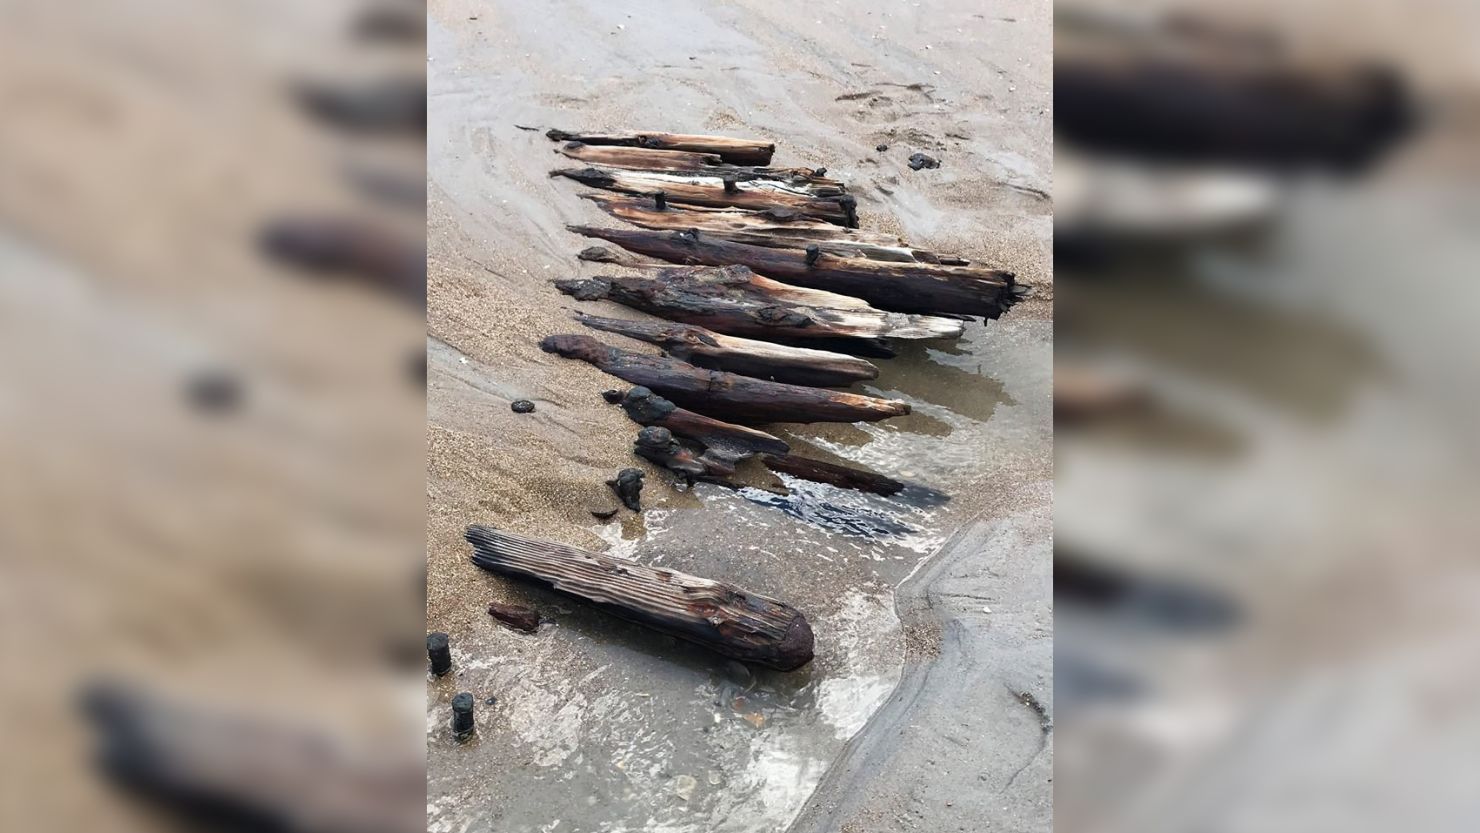 Tides unearthed a historical shipwreck on North Carolina's shore.